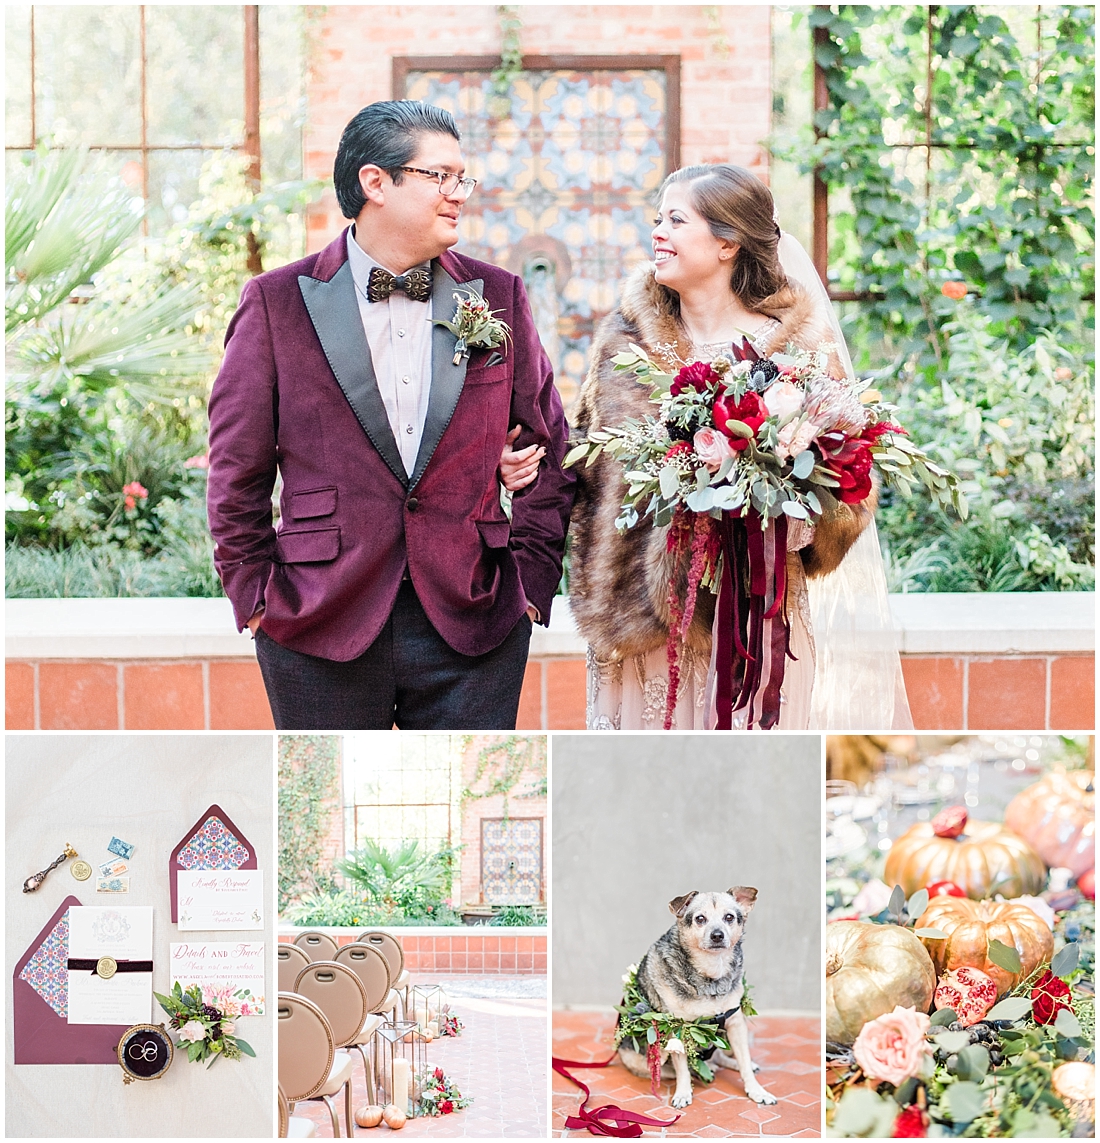 Hotel Emma wedding Photos featuring a fall romantic wedding with bhldn gown and The Elegant Bee floral 0160